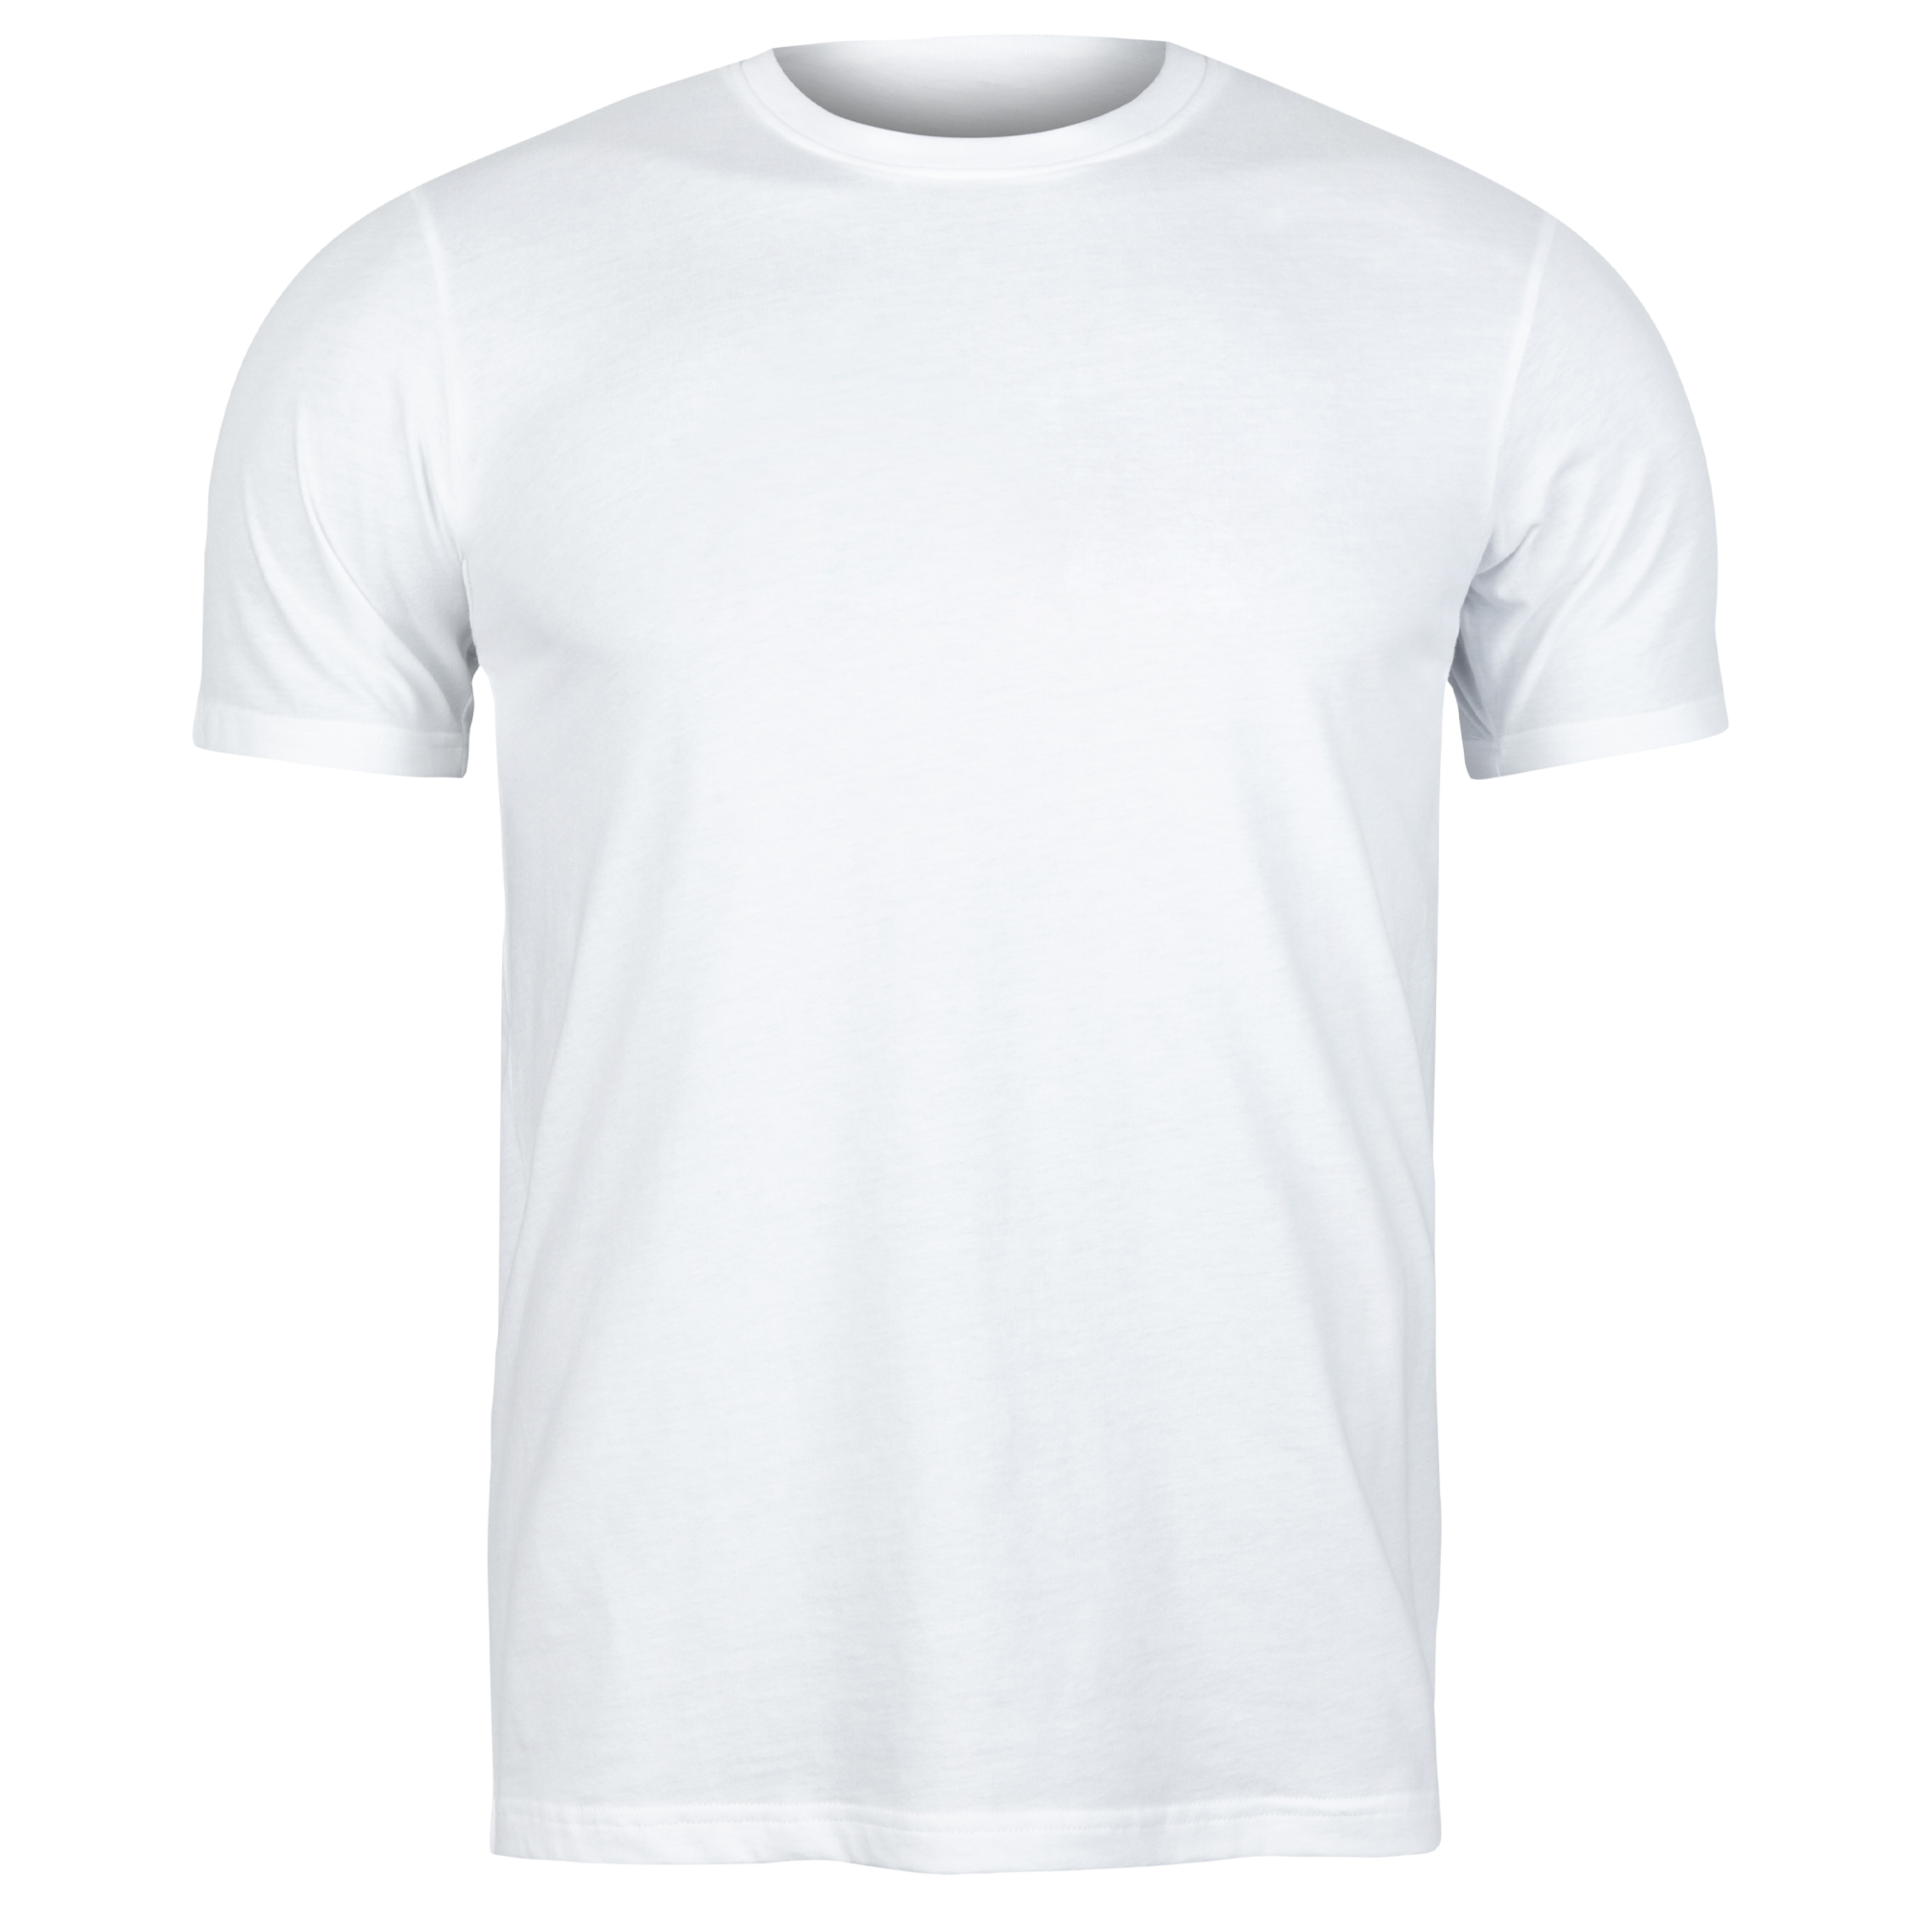 White Tshirt Front And Back Isolated On White Background Stock Photo